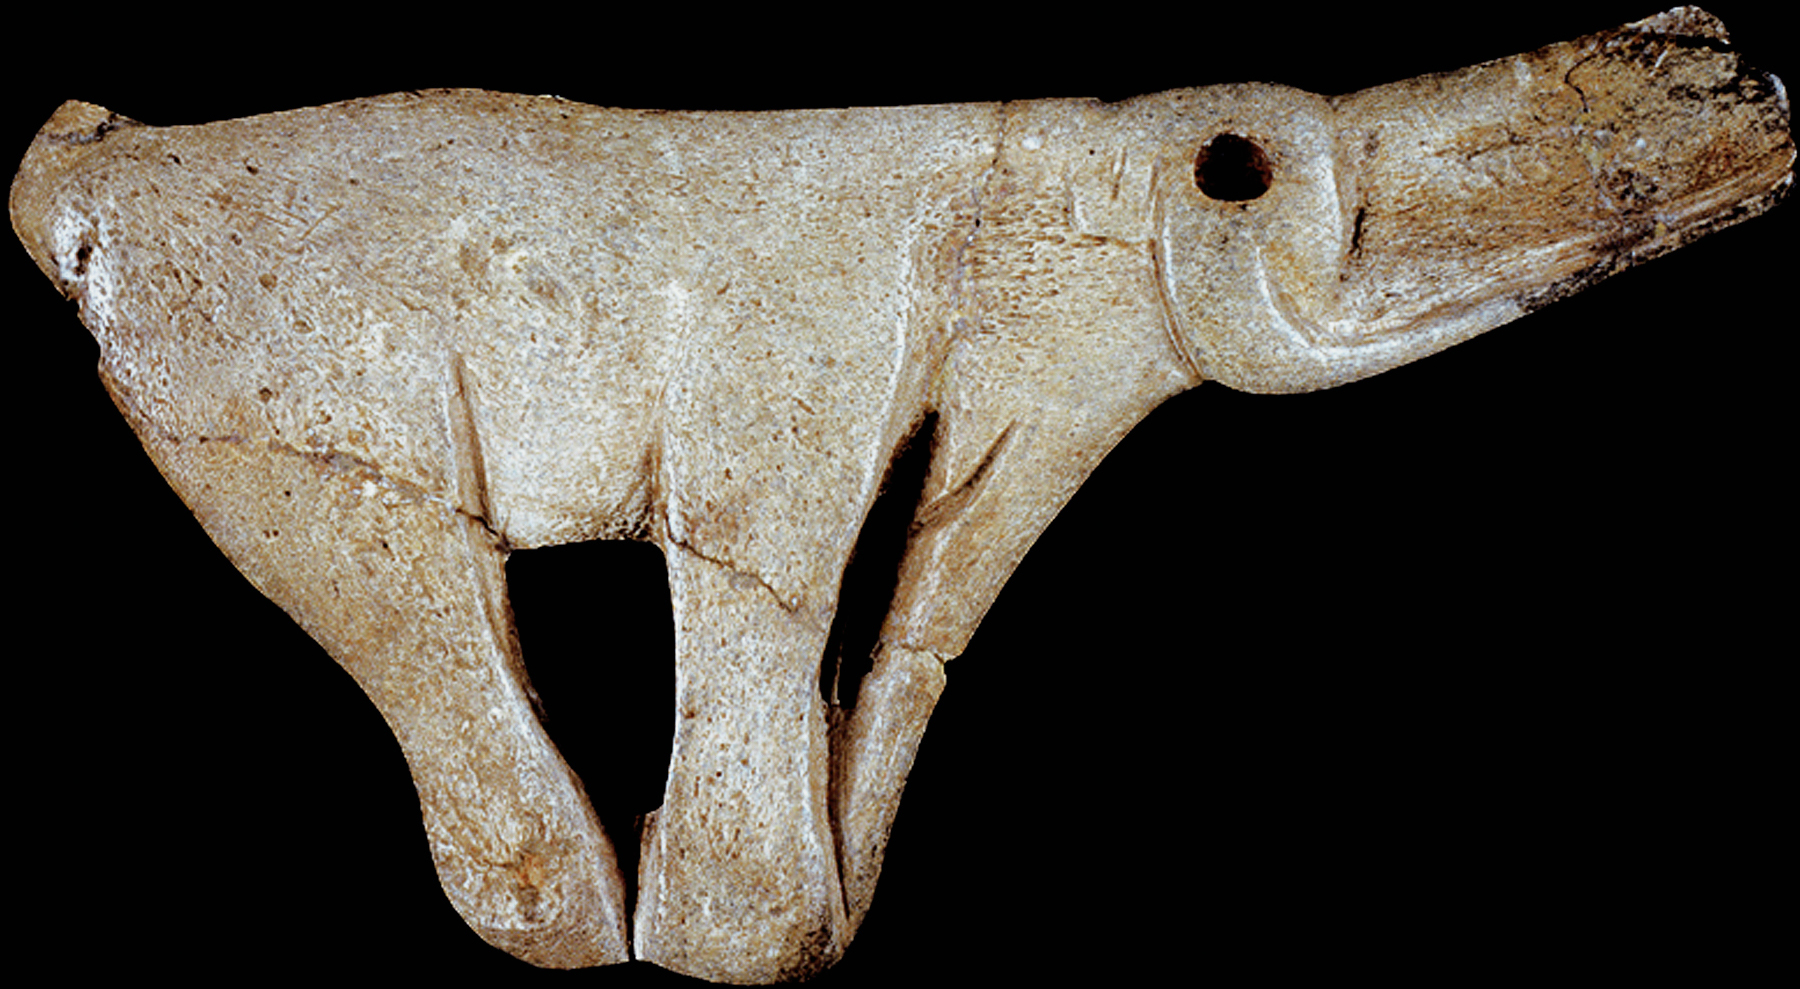 Mammoth Spear Thrower Sculptures of the Ice Age